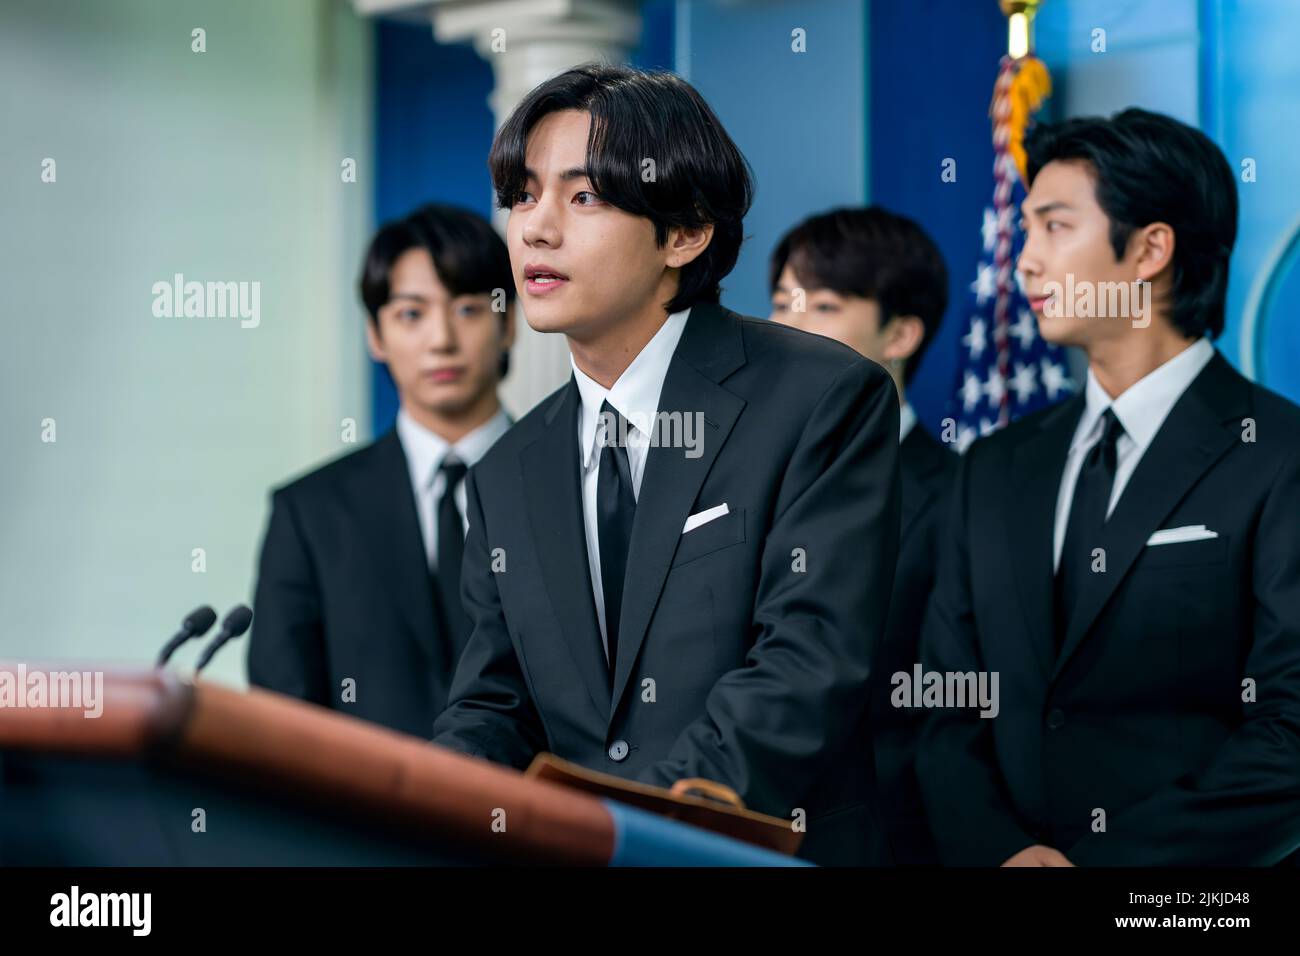 White House Press Secretary Karine Jean-Pierre is joined by K-pop singing group BTS for a press briefing Tuesday May 31, 2022, in the James S. Brady Press Briefing Room of the White House. (Official White House Photo by Cameron Smith) Stock Photo